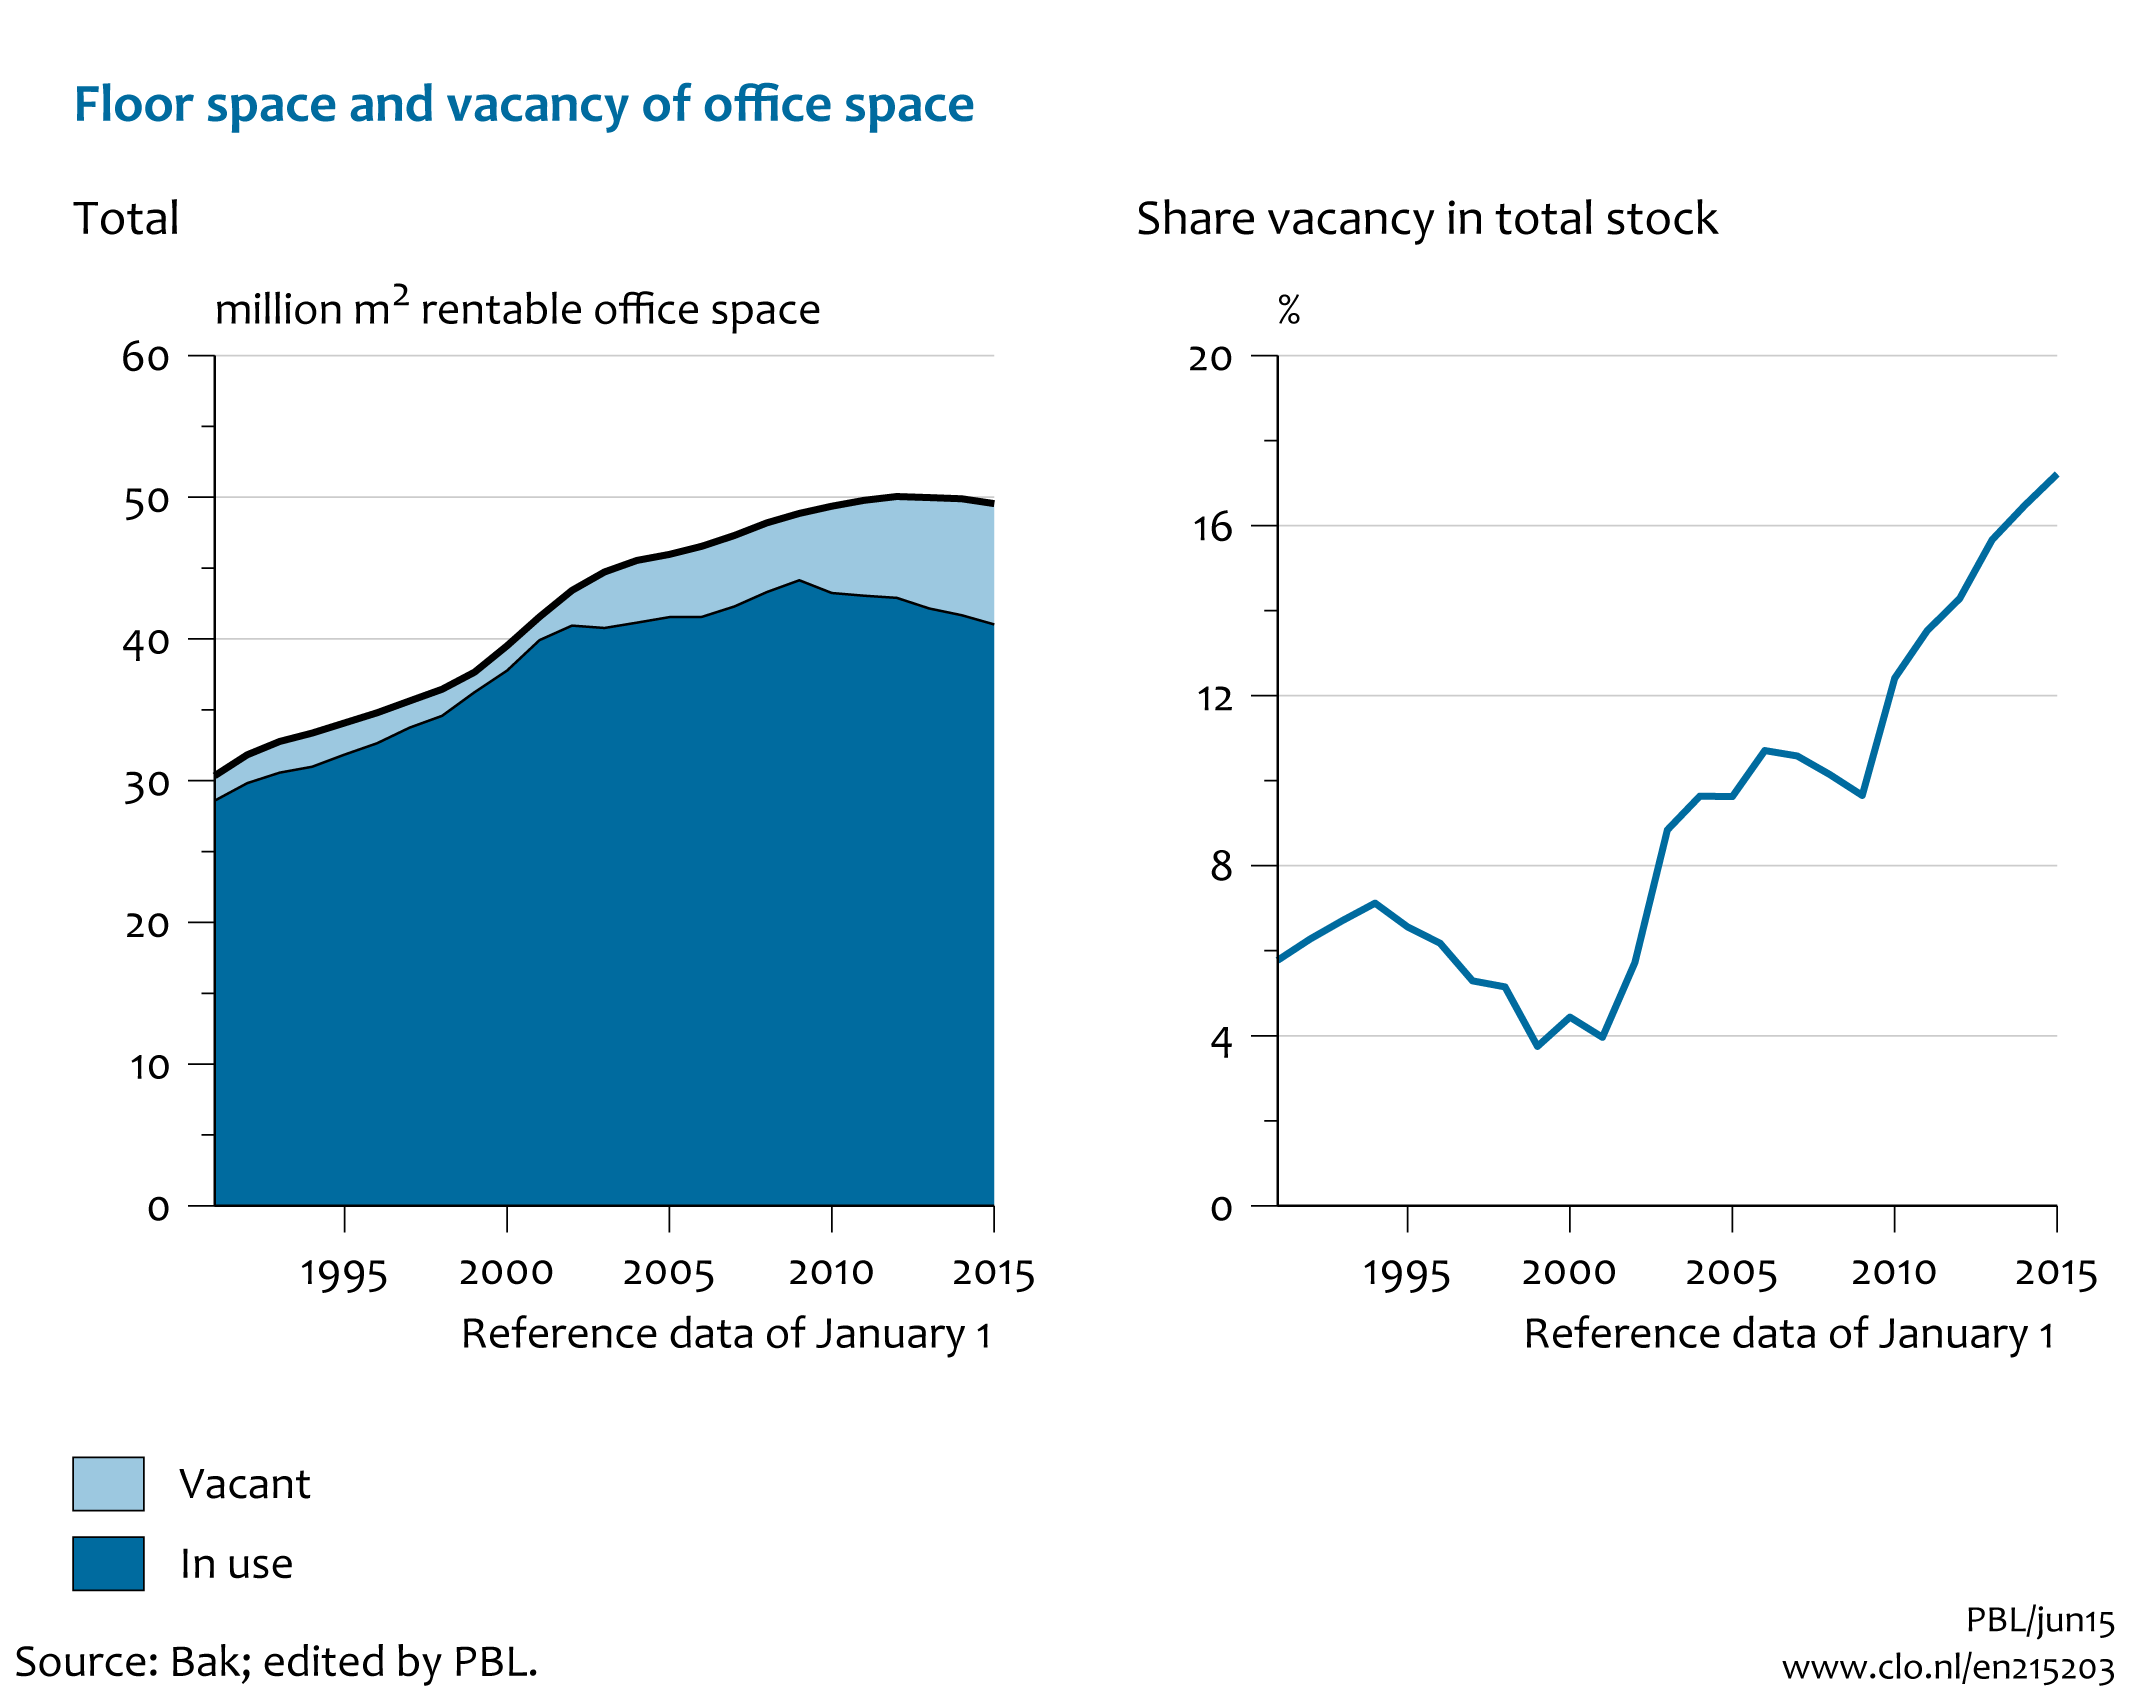 Image Floor space and vacancy of office space, 1991-2015. The image is further explained in the text.